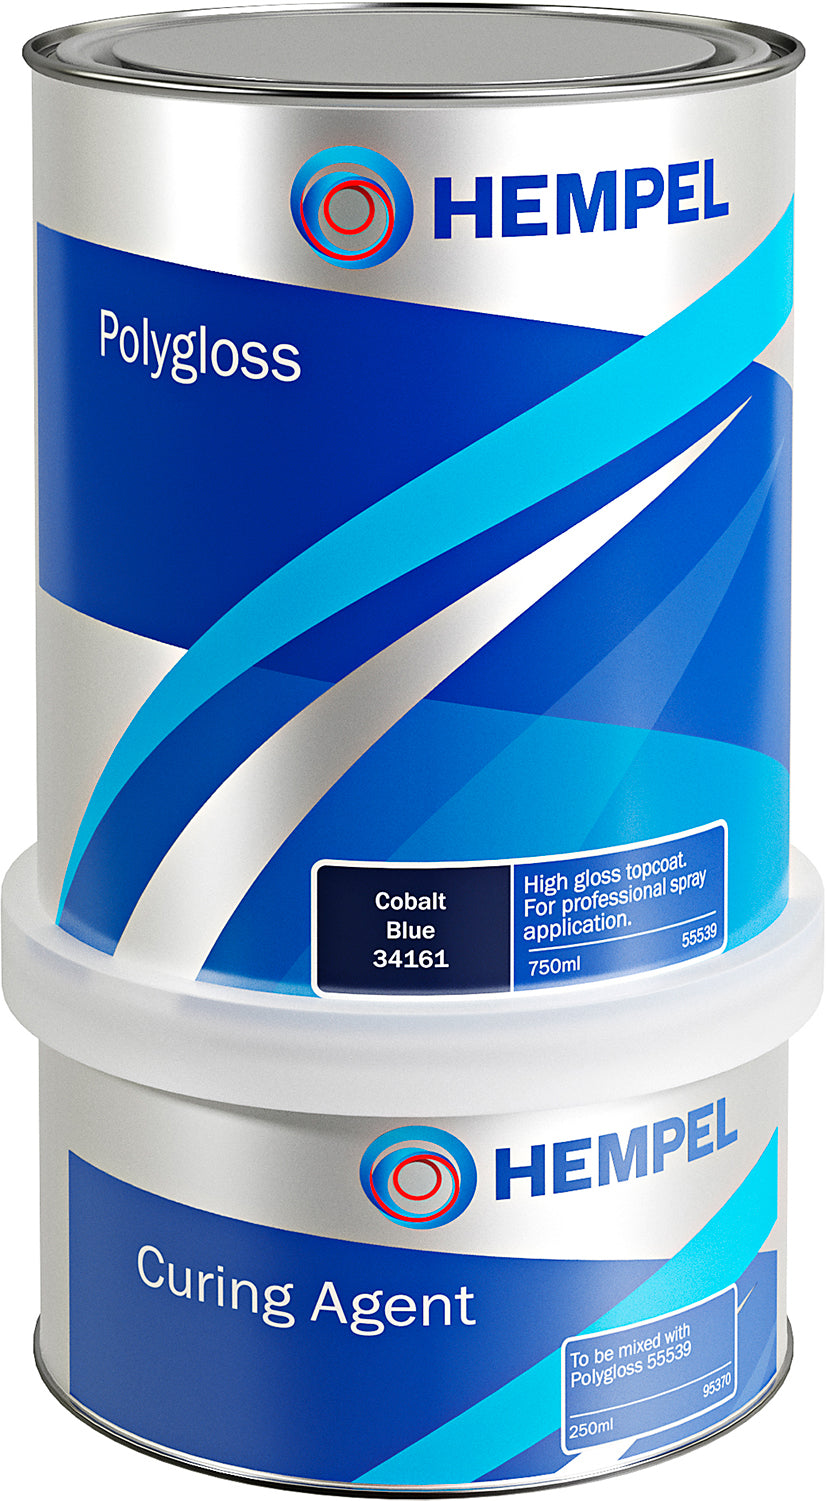 Poly Gloss Pure White 10231 0.75 ltr.